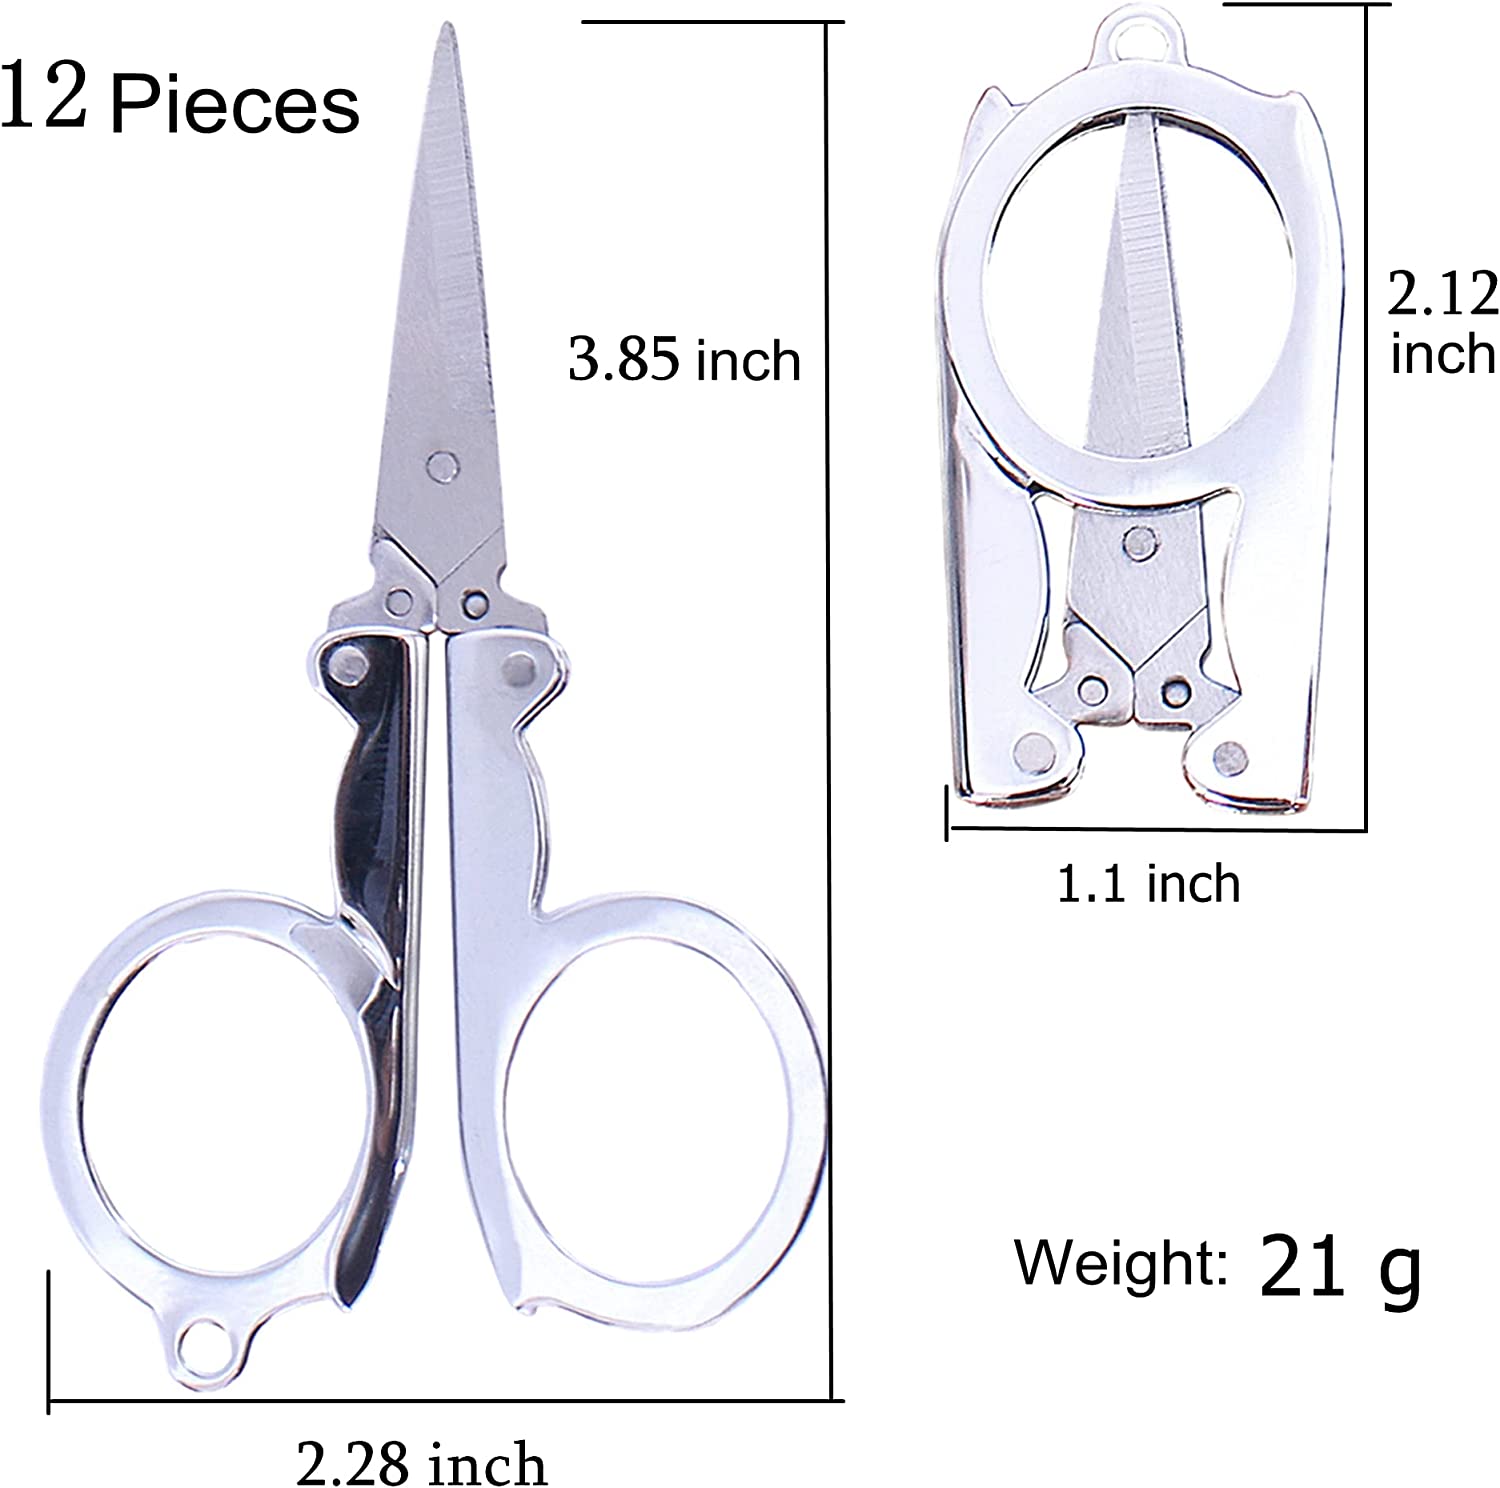  PDCTACST Small Folding Scissors, 4 PCS Mini Stainless Steel  Foldable Scissor, Portable Travel Cutter Pocket Craft Scissors for School  Classroom Home Camping Sewing Paper Cutting DIY Fabric Project : Arts,  Crafts